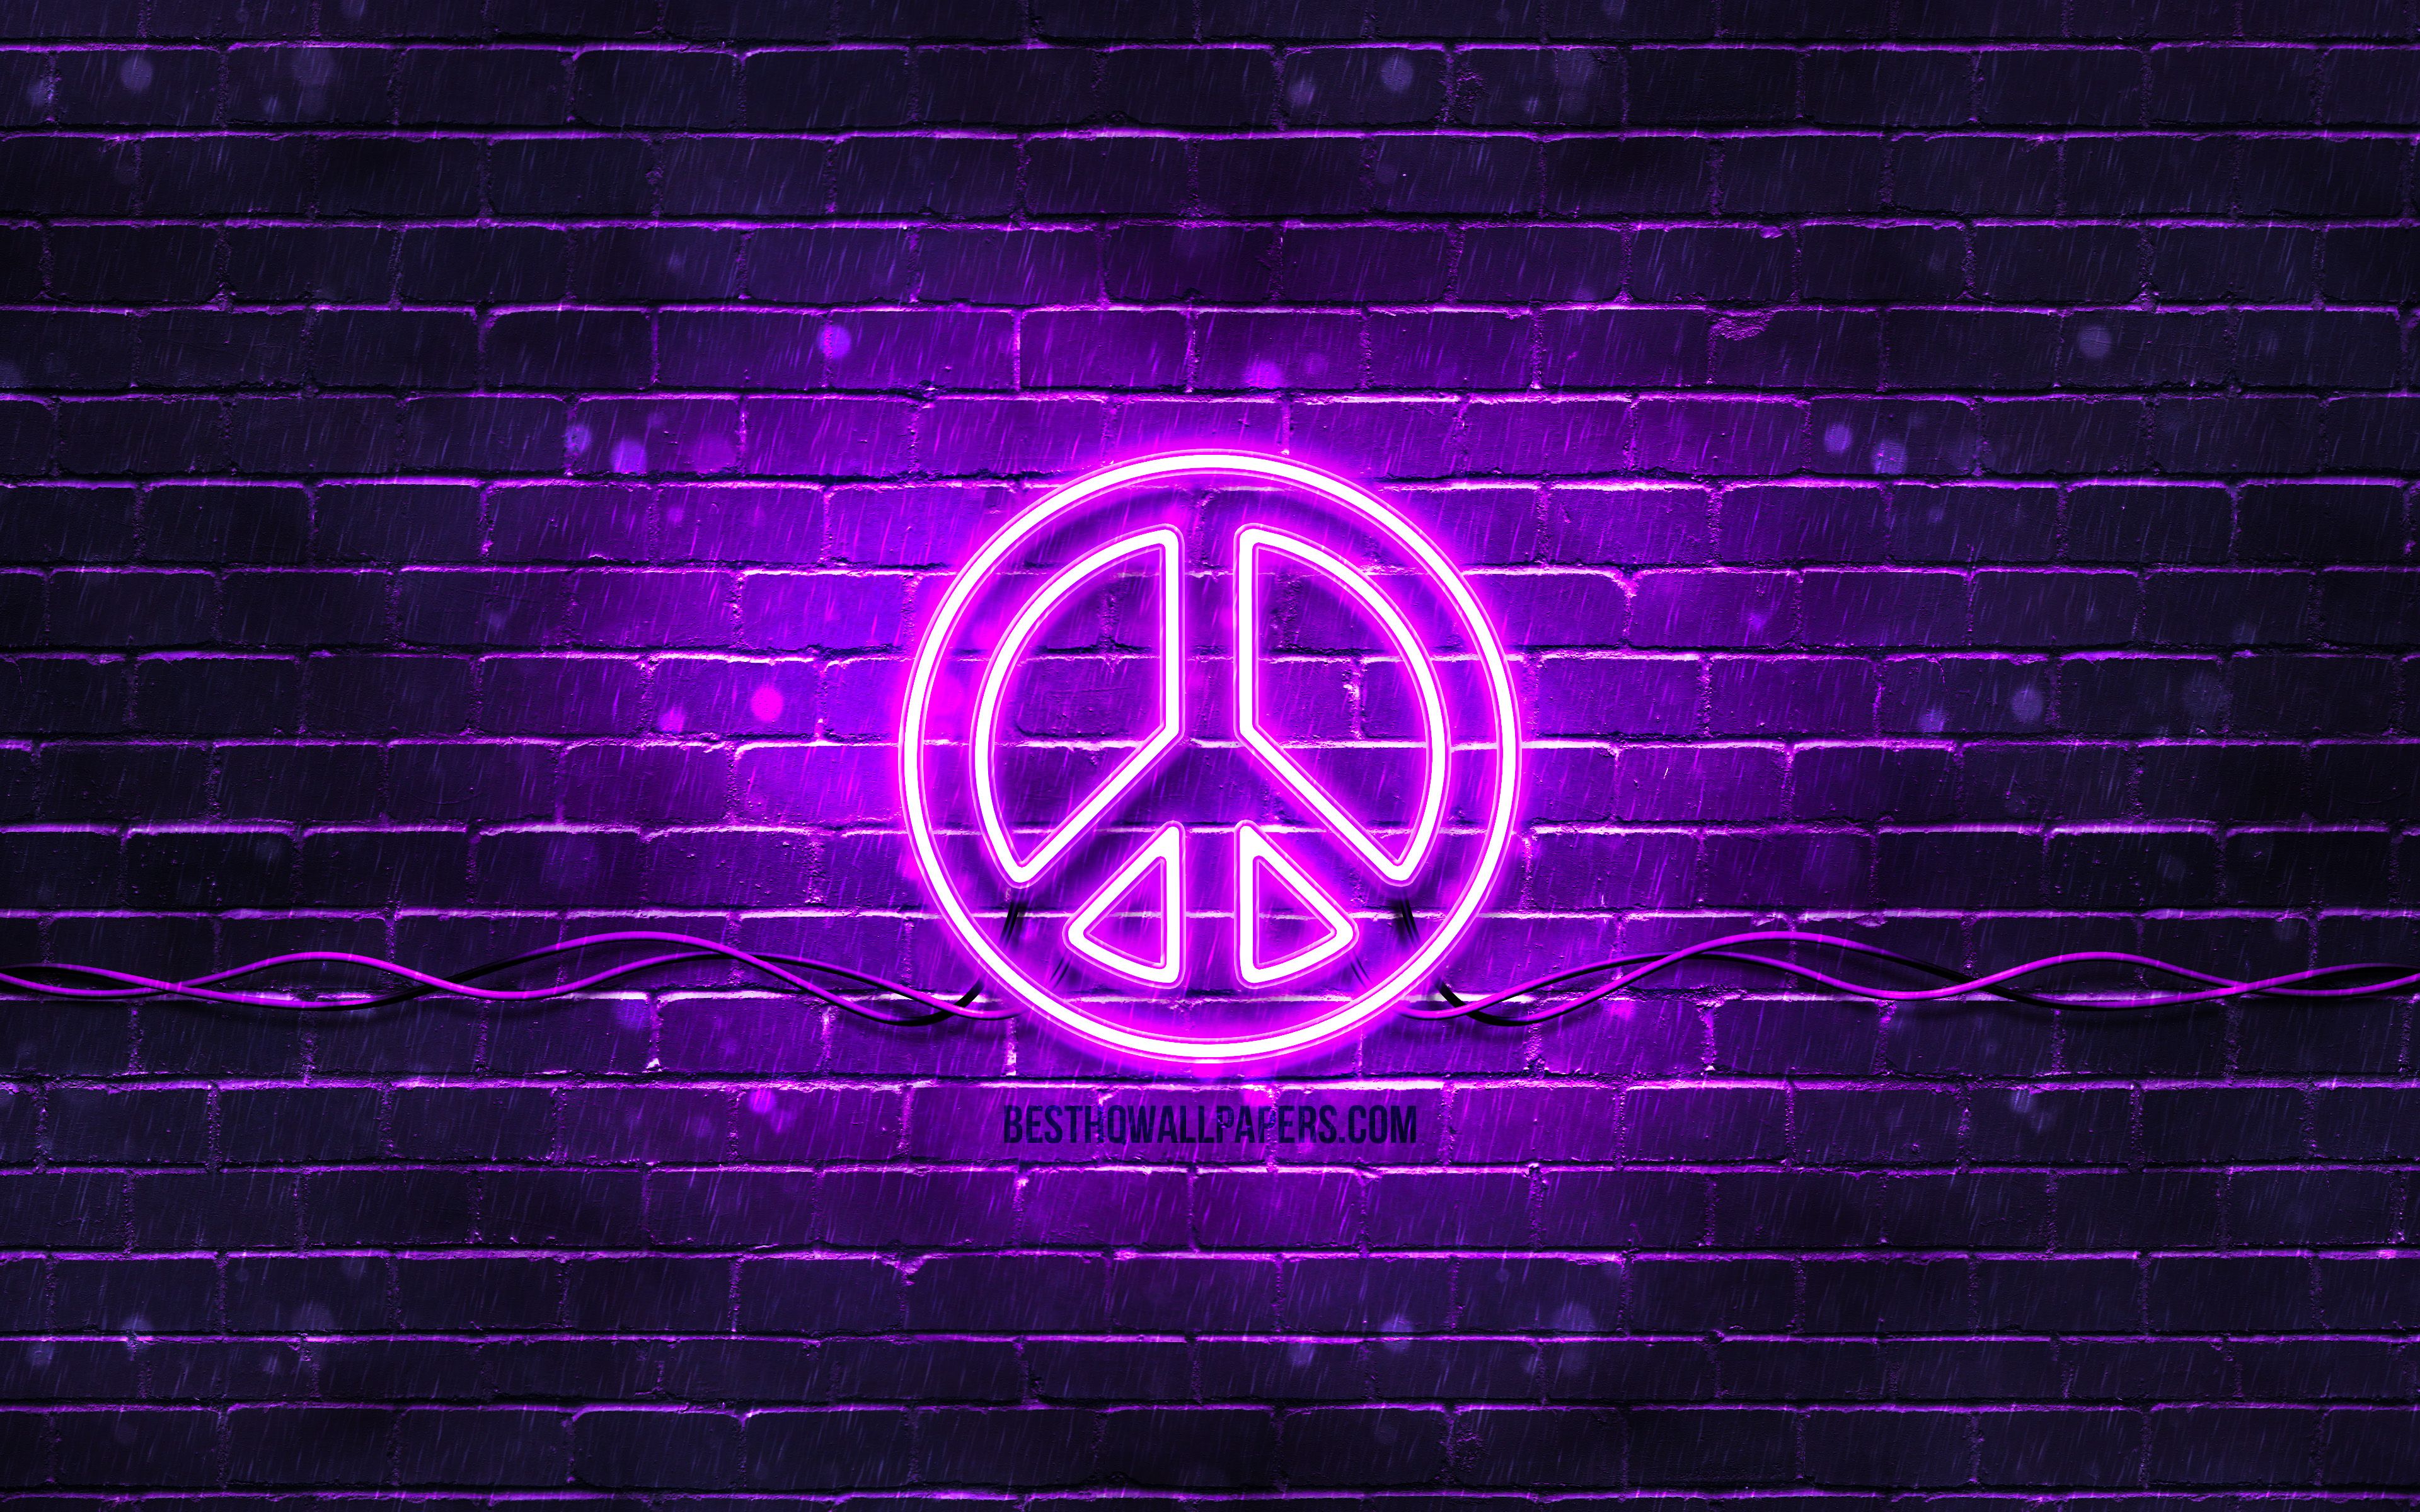 Download wallpaper Peace violet sign, 4k, violet brickwall, Peace symbol, creative, Peace neon sign, Peace sign, Peace for desktop with resolution 3840x2400. High Quality HD picture wallpaper